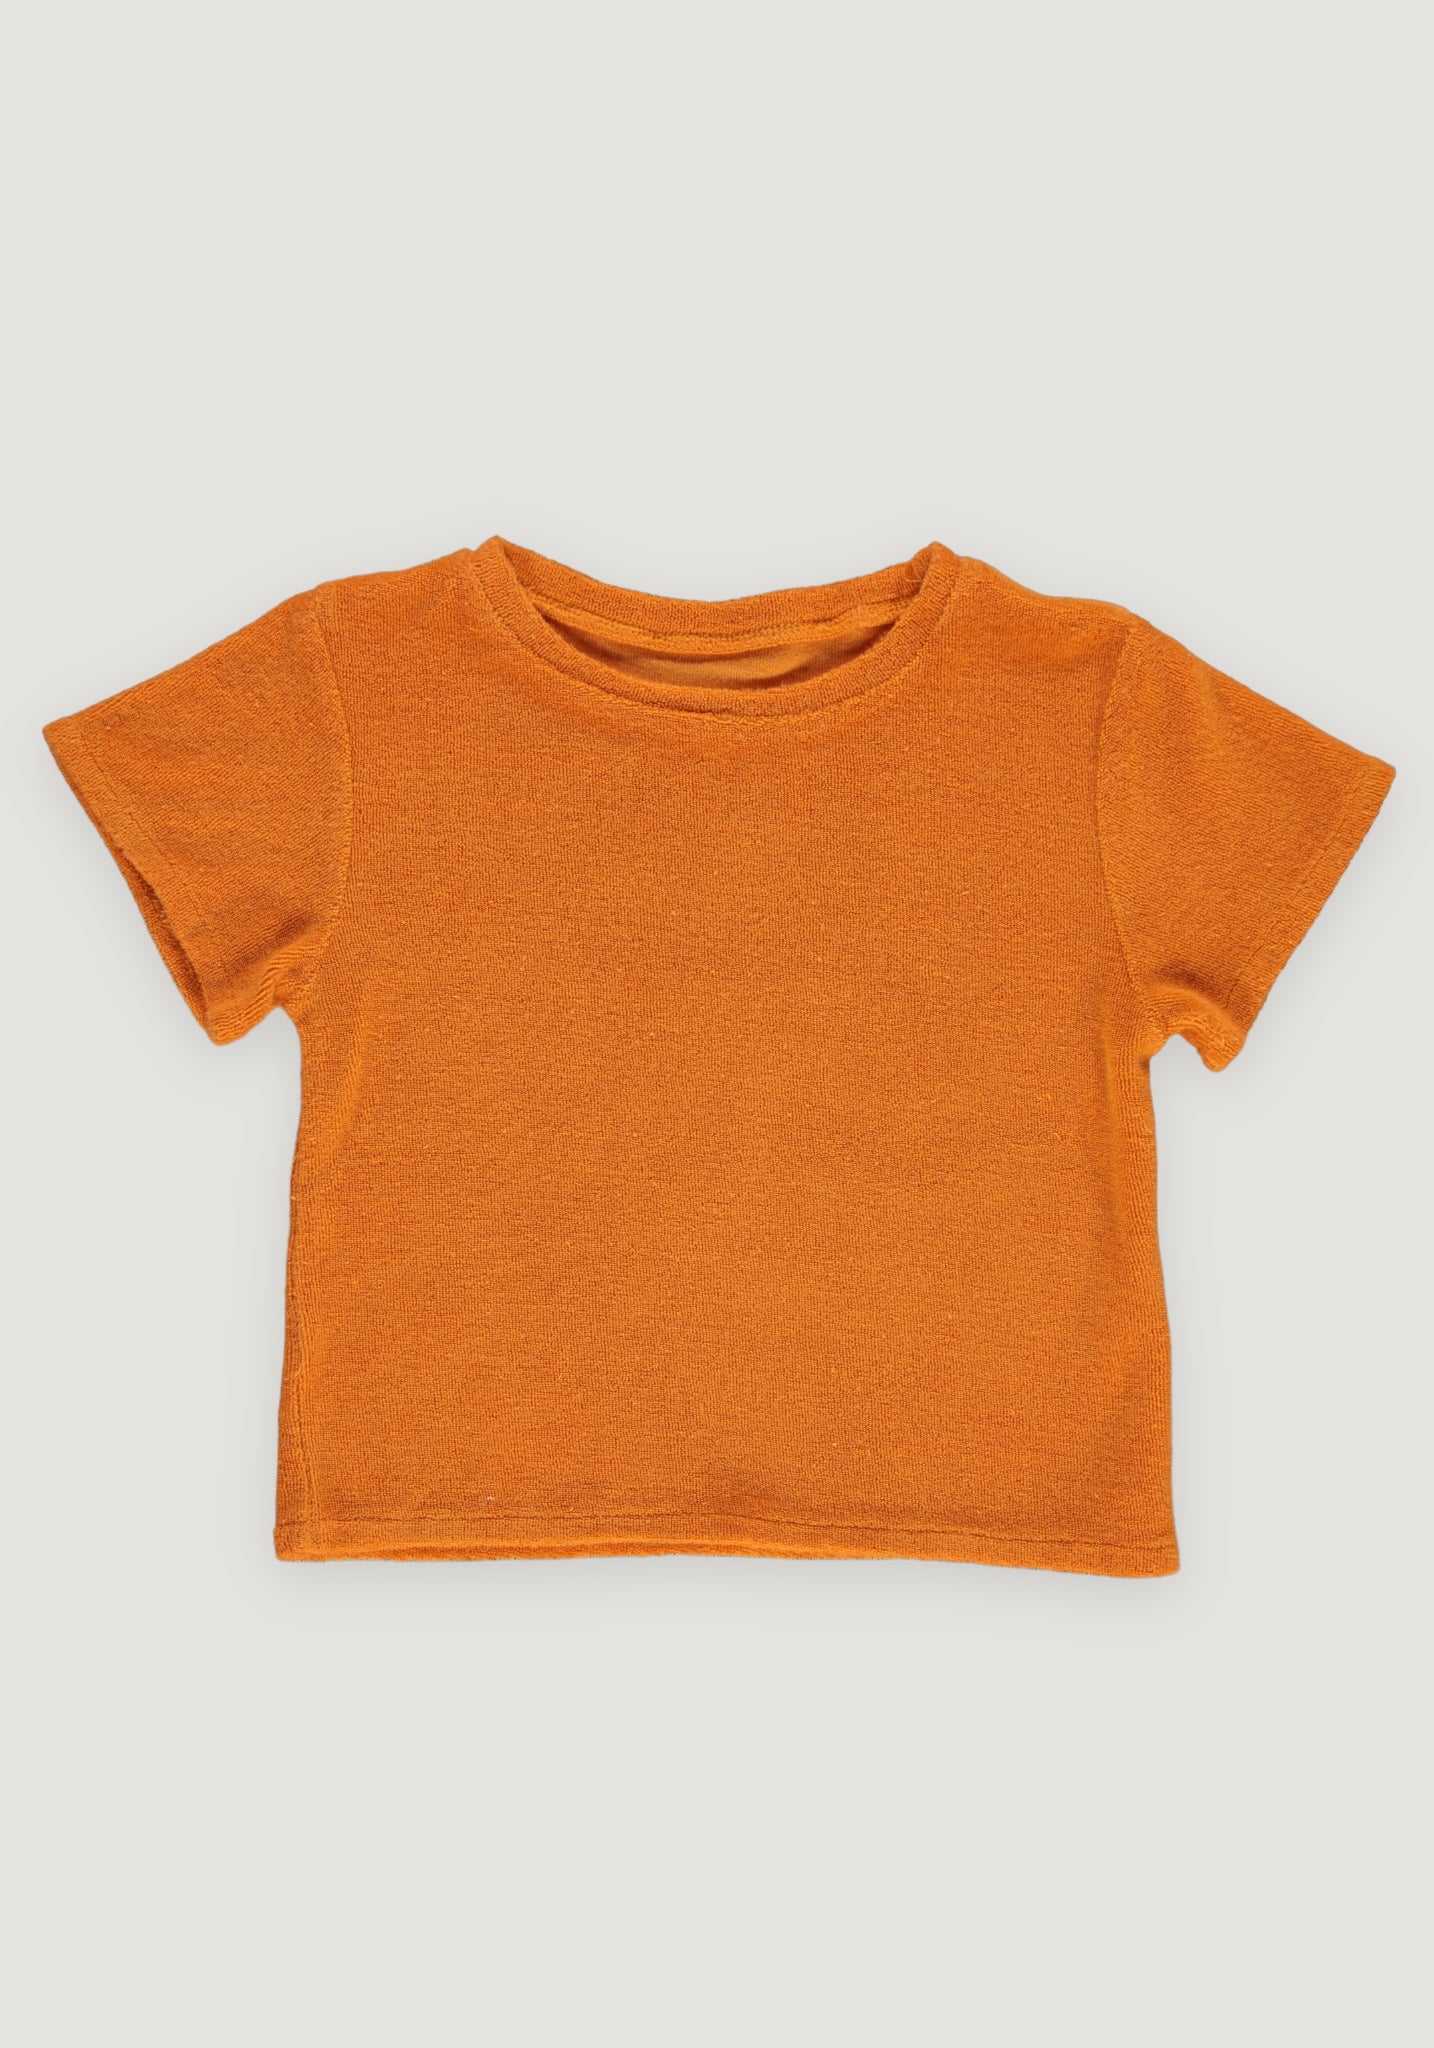 Tricou terry din bumbac - Orgeat Russet Orange Poudre Organic HipHip.ro